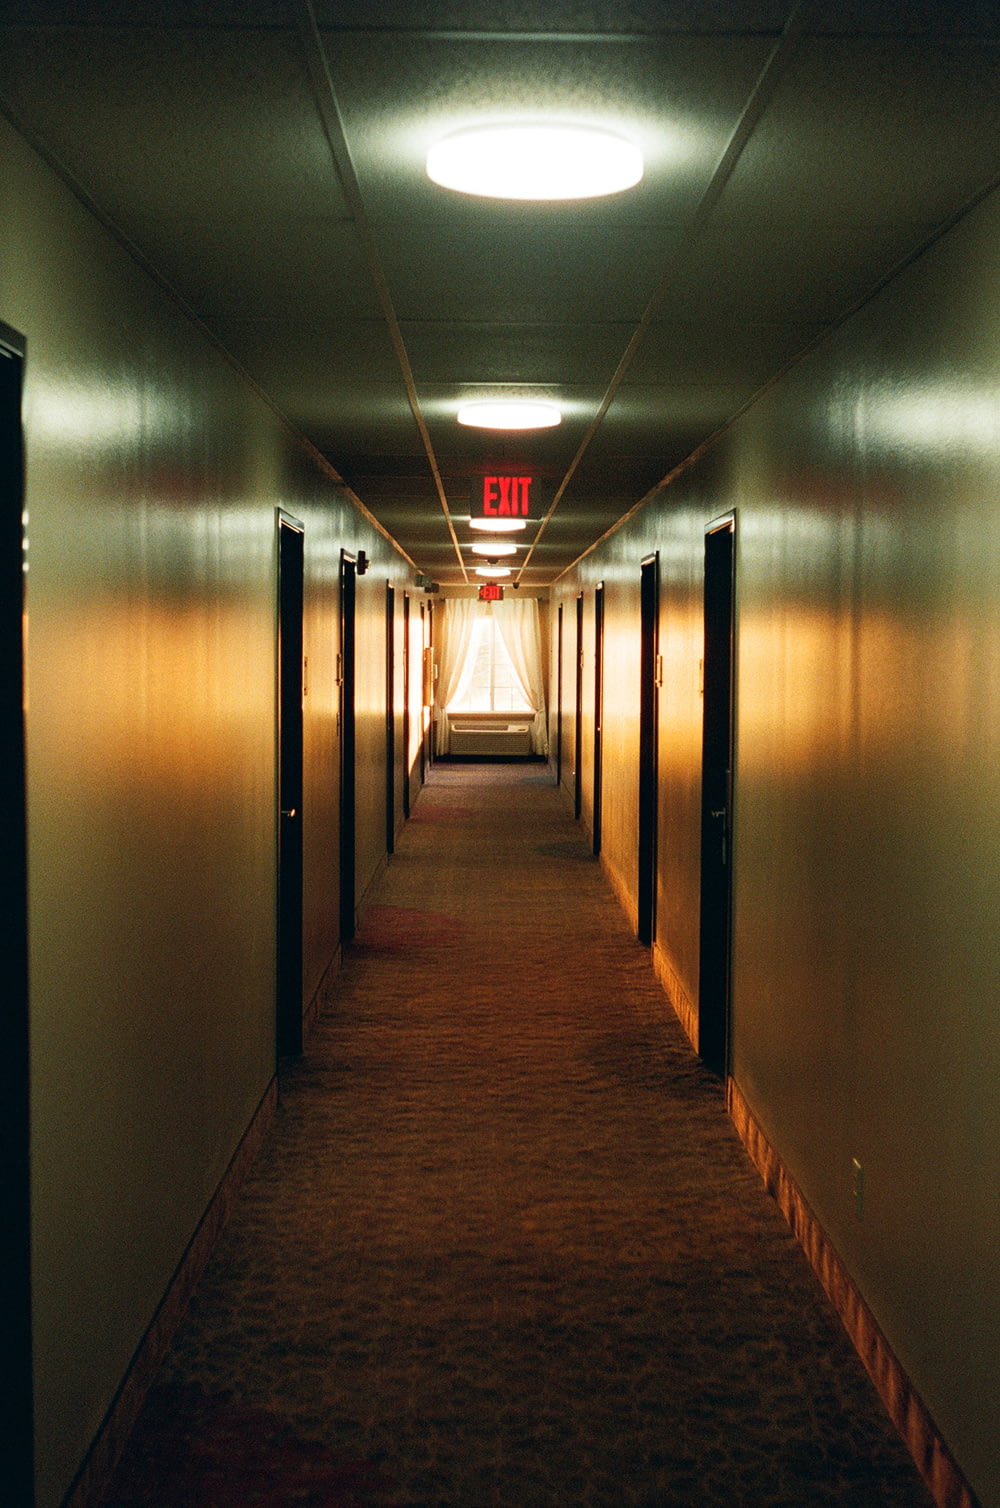 a long hallway with a exit sign on the wall